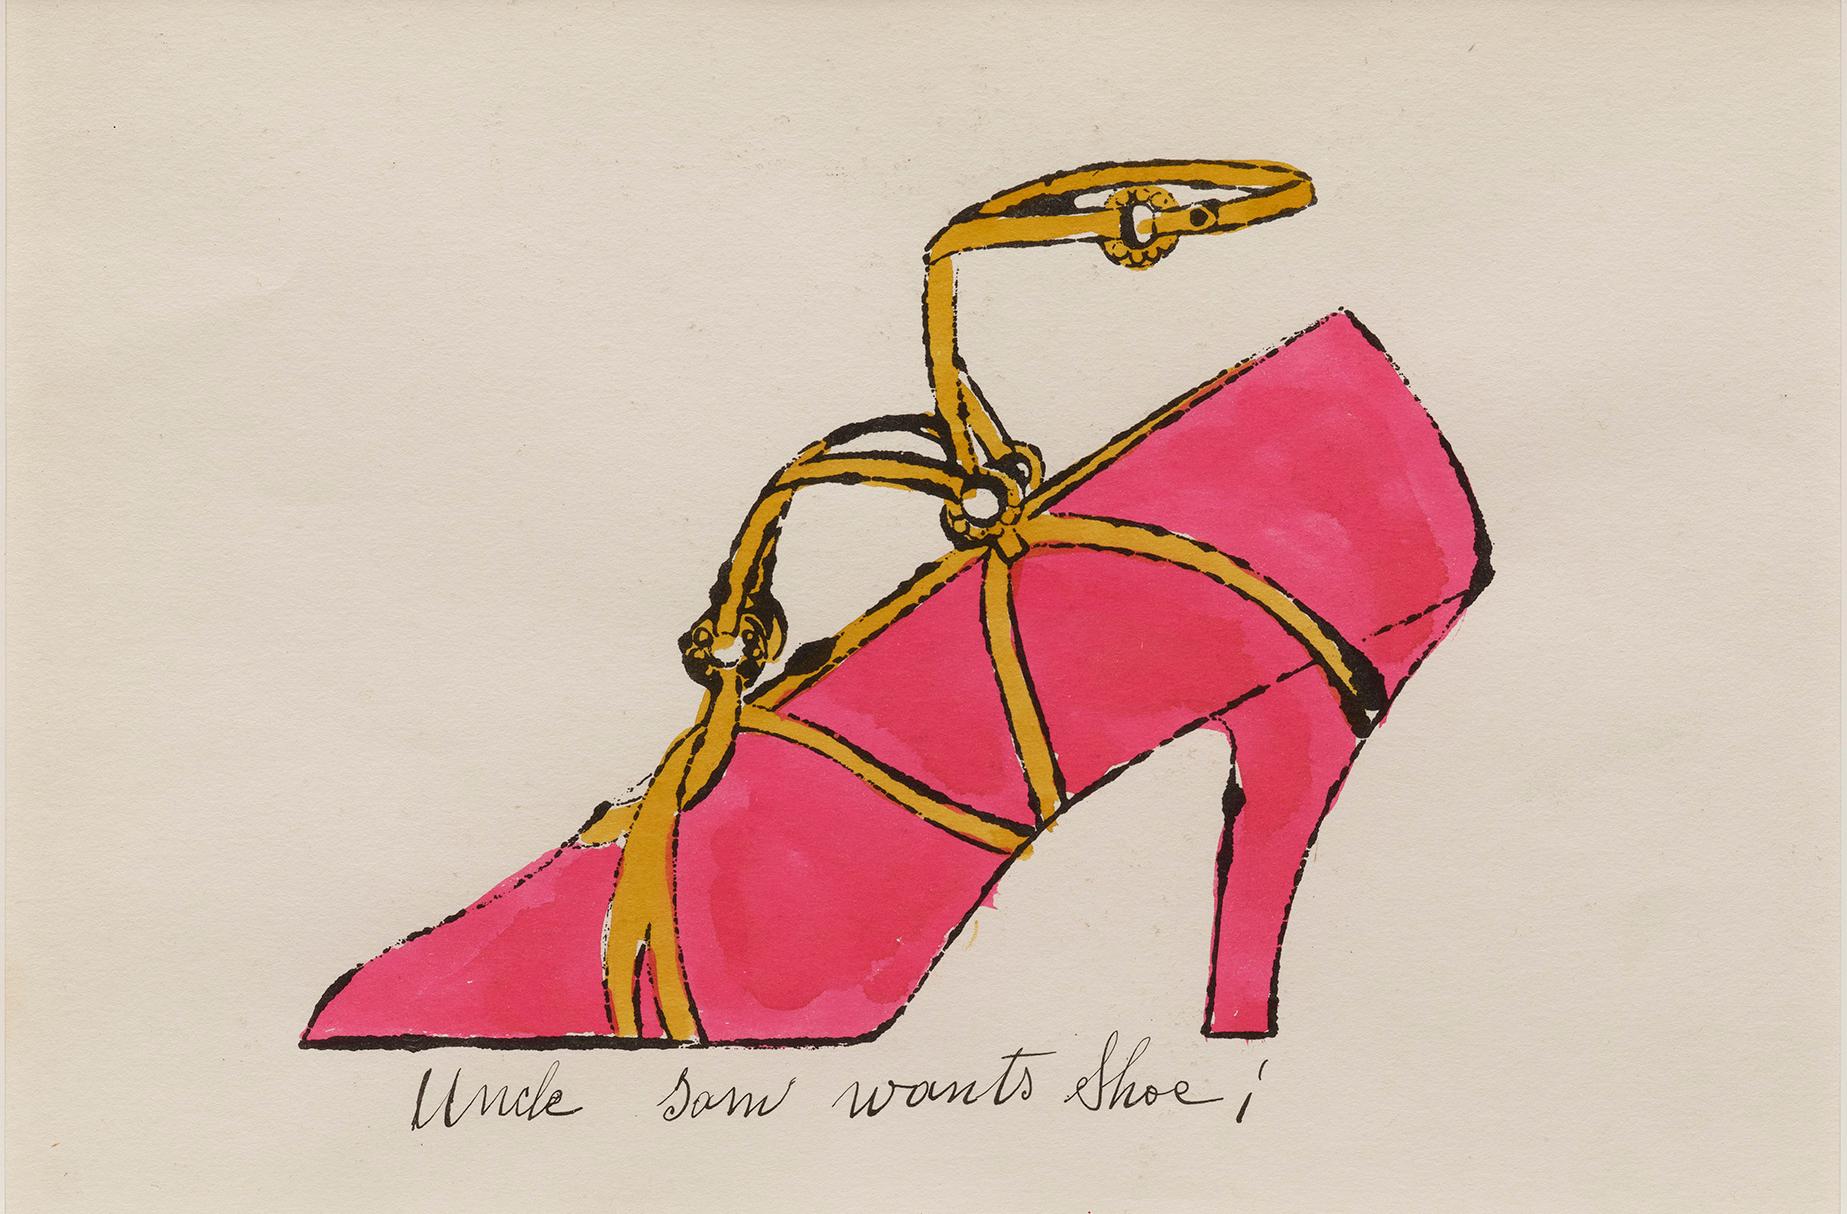 Uncle Sam Wants Shoe - Print by Andy Warhol